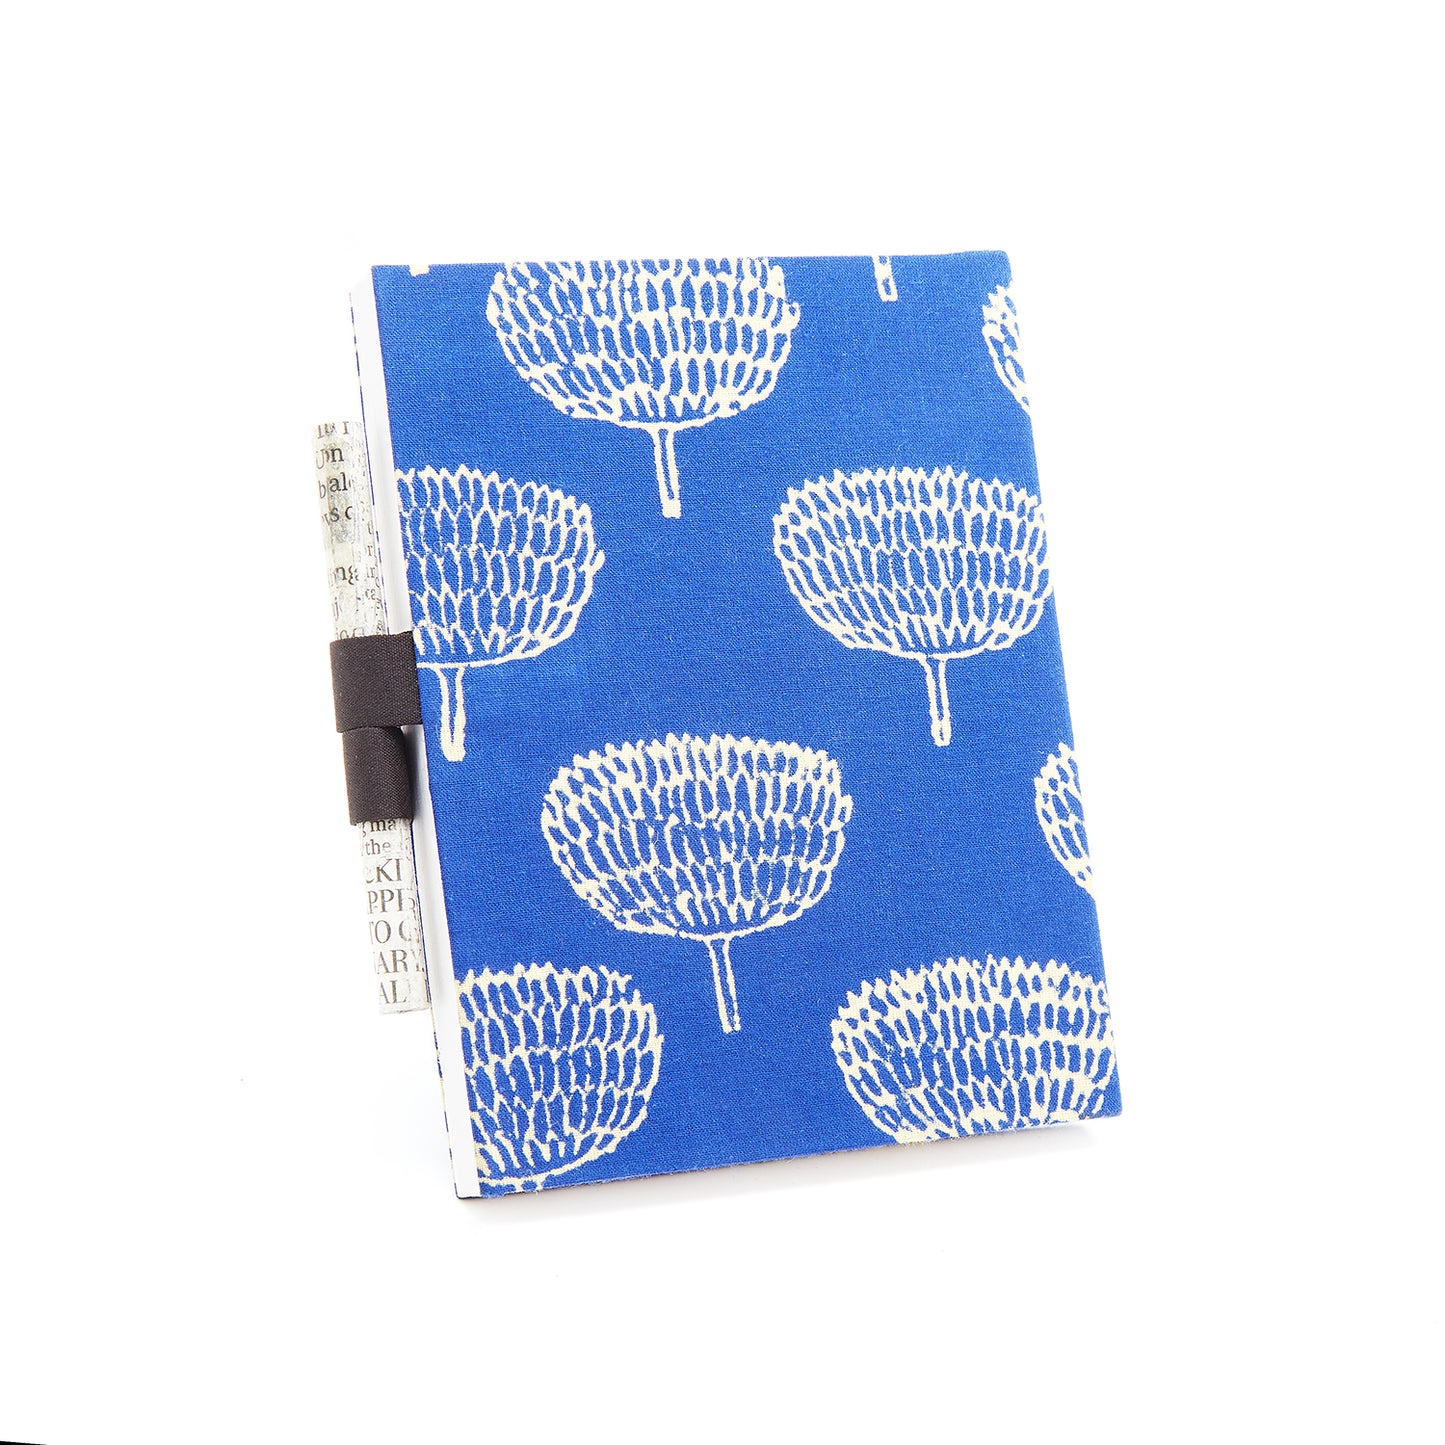 Flower Block Print on a Denim Blue - Cloth Diary with Newspaper Pencil